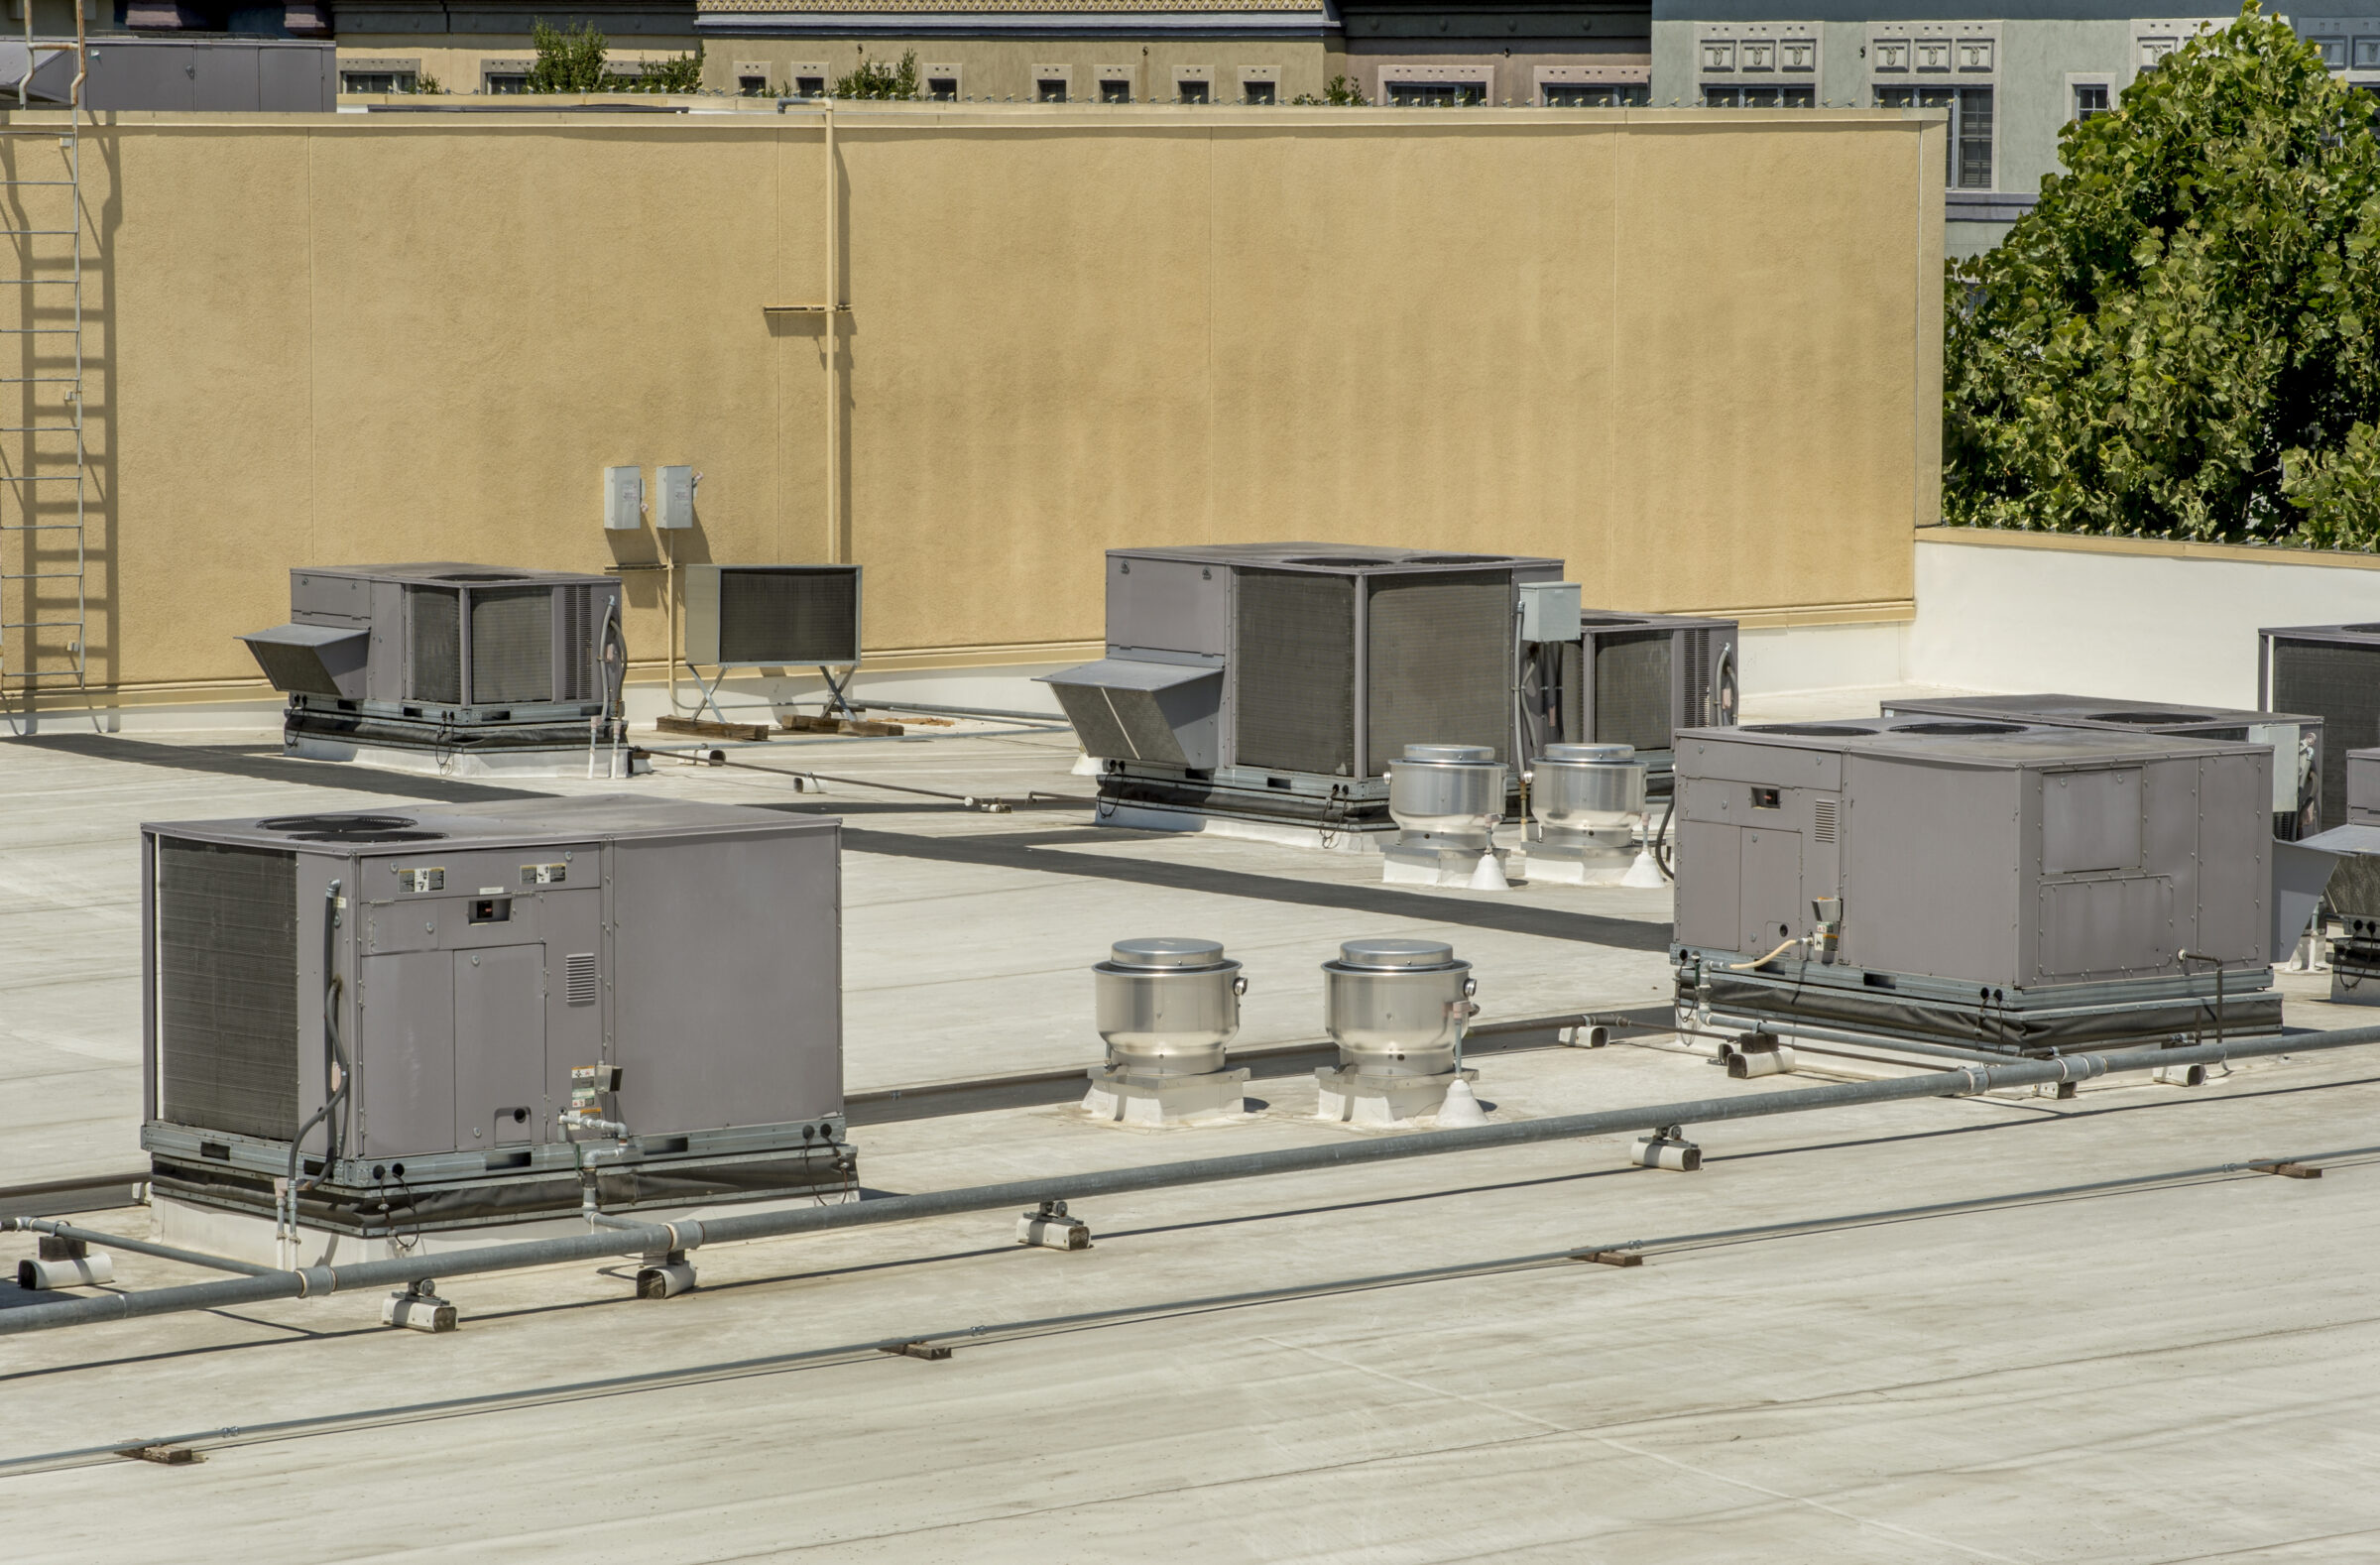 This image shows a flat rooftop with multiple HVAC units, vent pipes, and a beige wall in the background. No persons are visible.